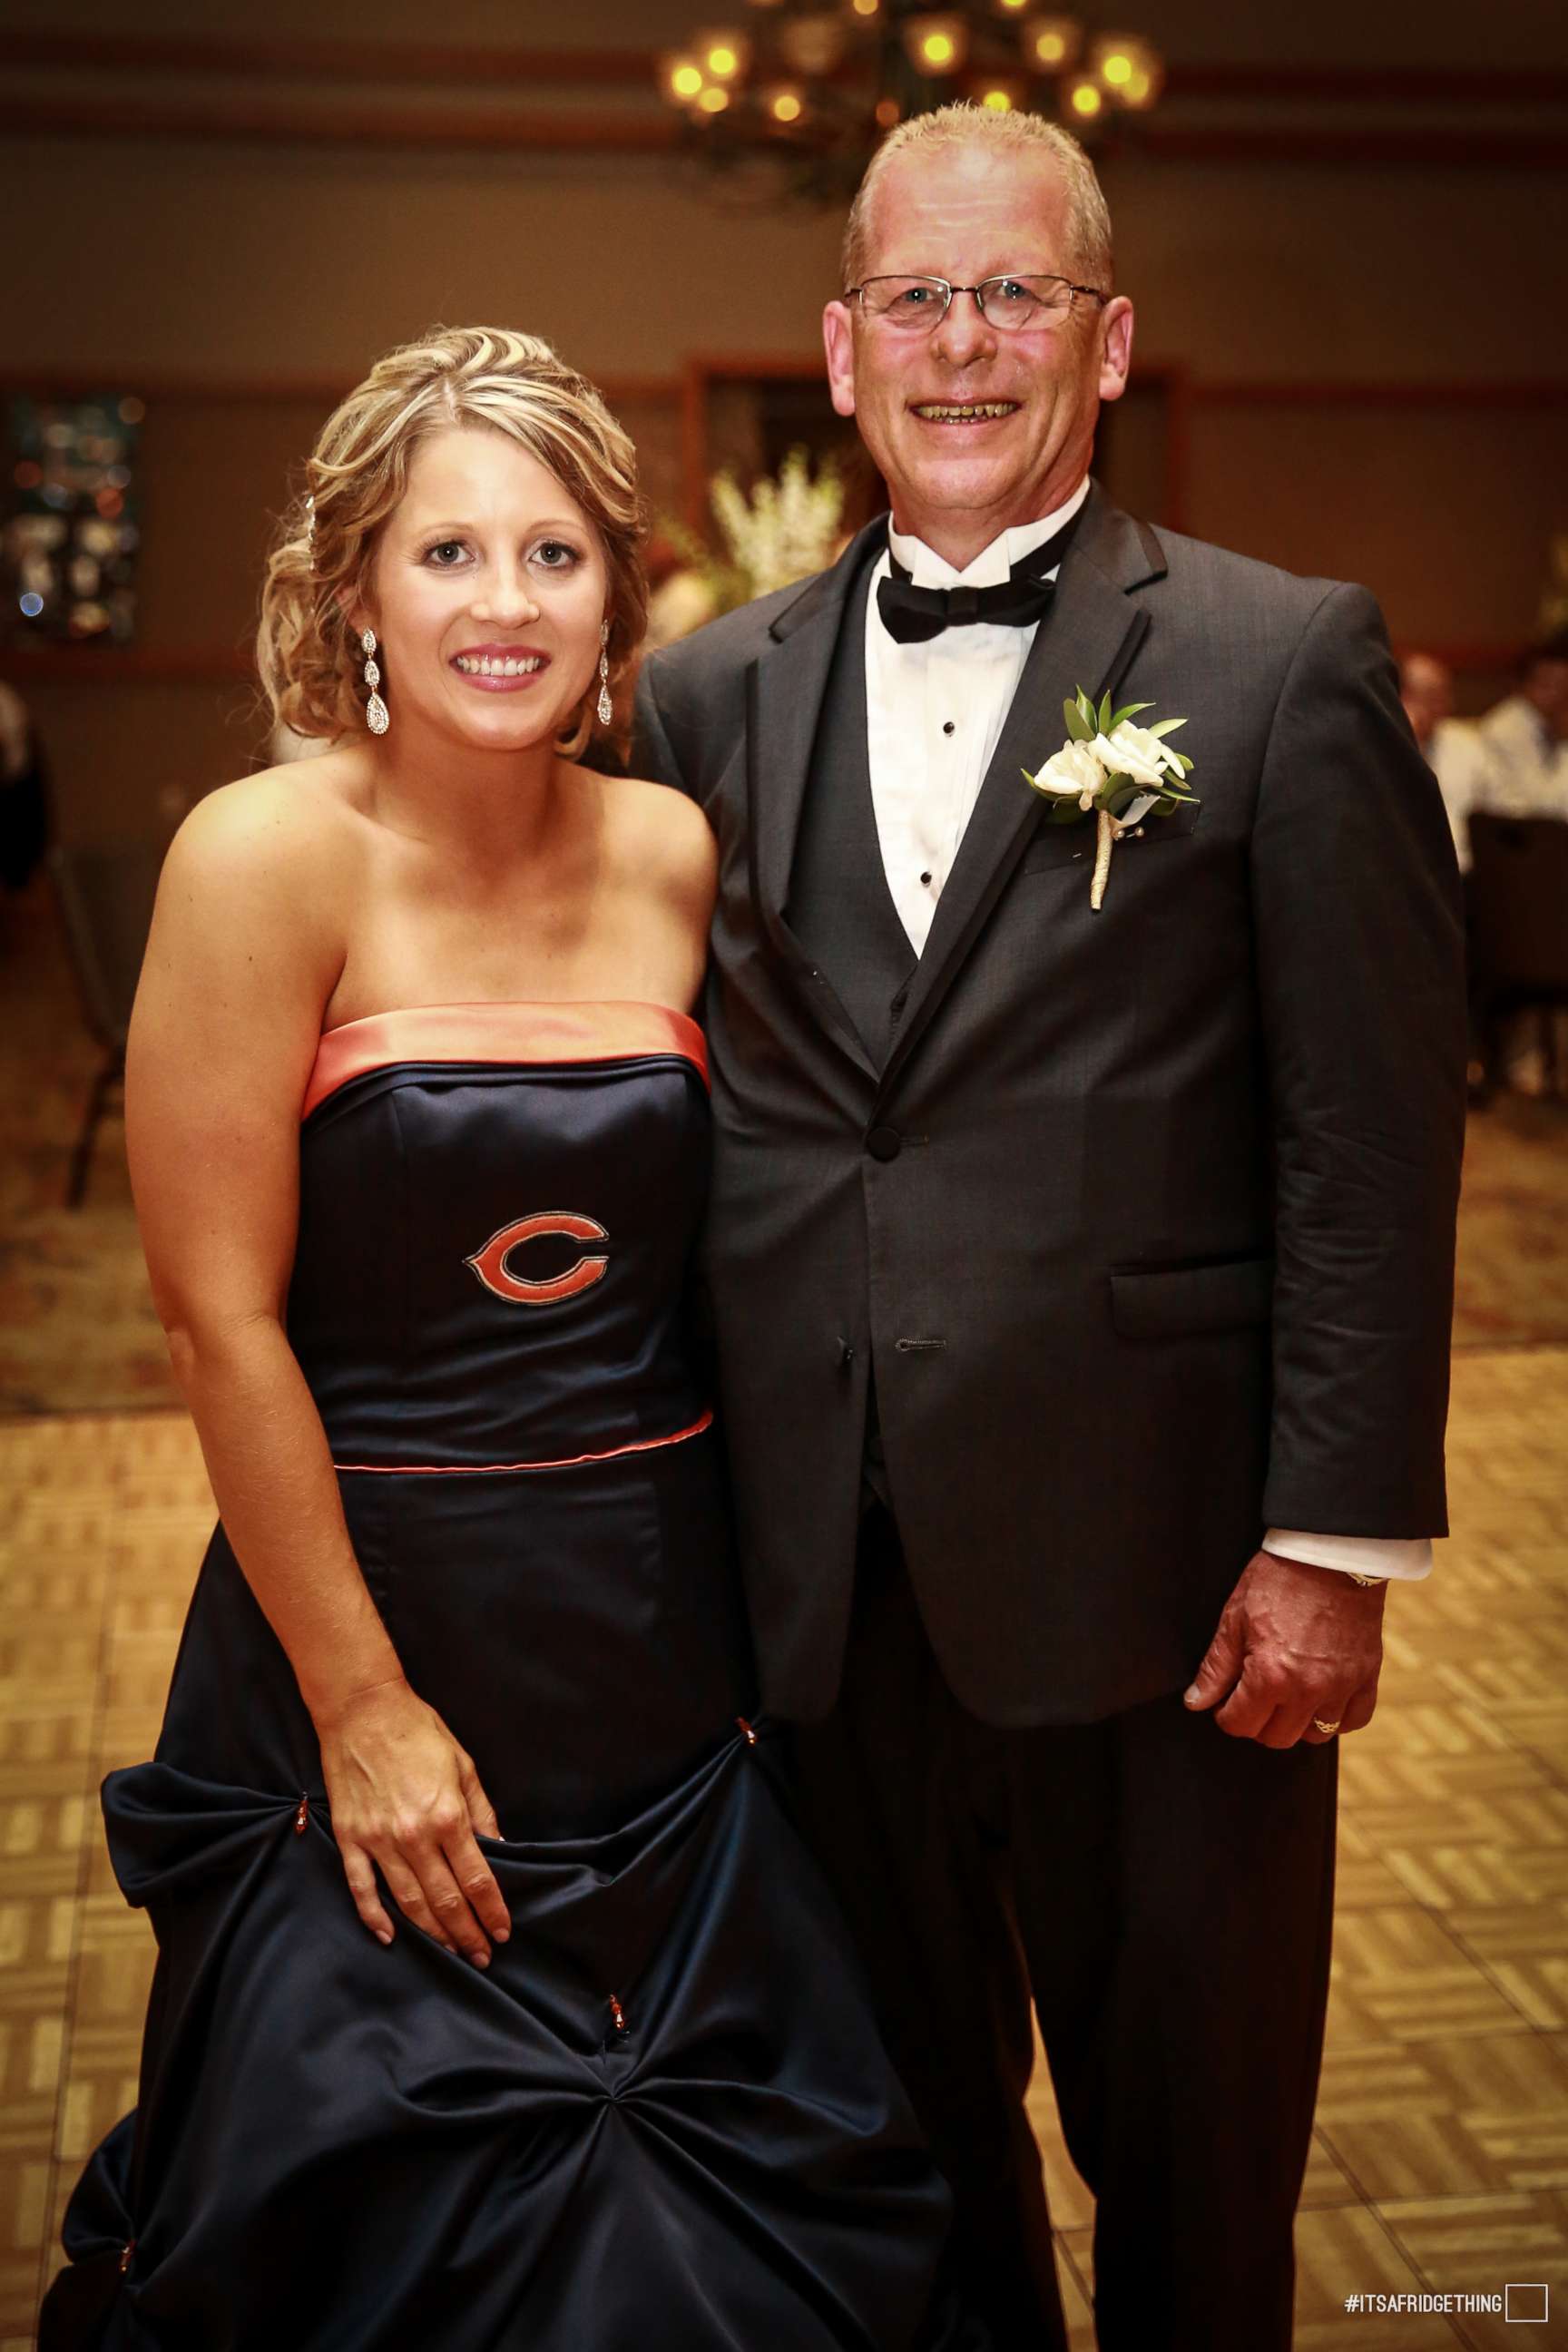 PHOTO: Brittney Harmon surprised her die-hard Chicago Bears fan father, Steve Benda, by wearing a team-themed dress at her wedding on July 22, 2017.